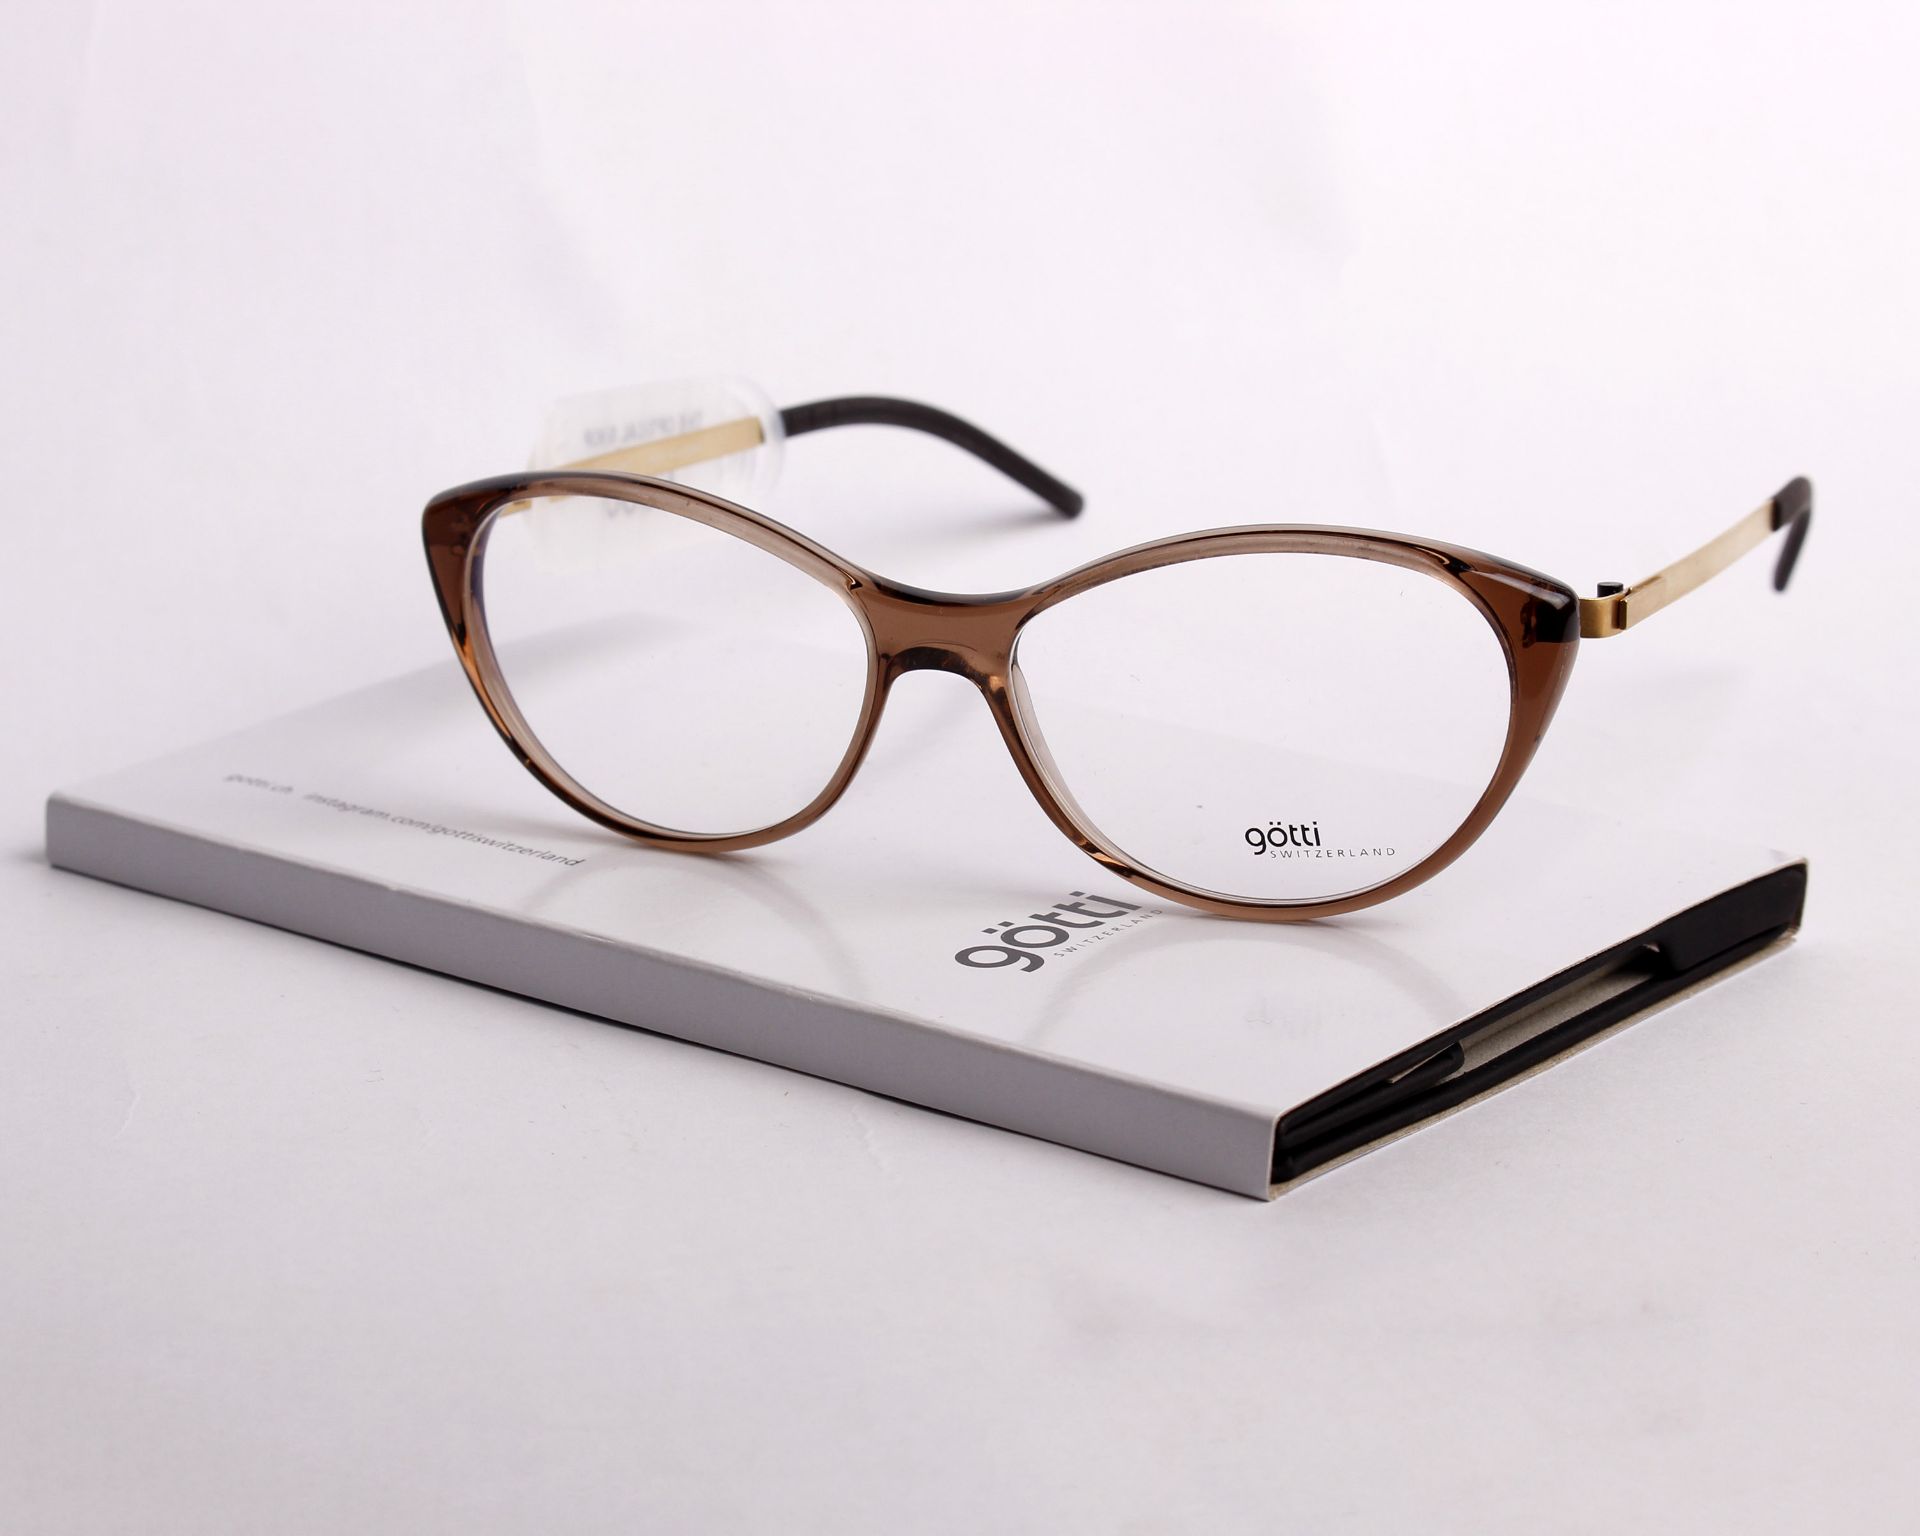 A pair of as new Gotti glasses frames with clear glass (RRP £330). - Image 3 of 3